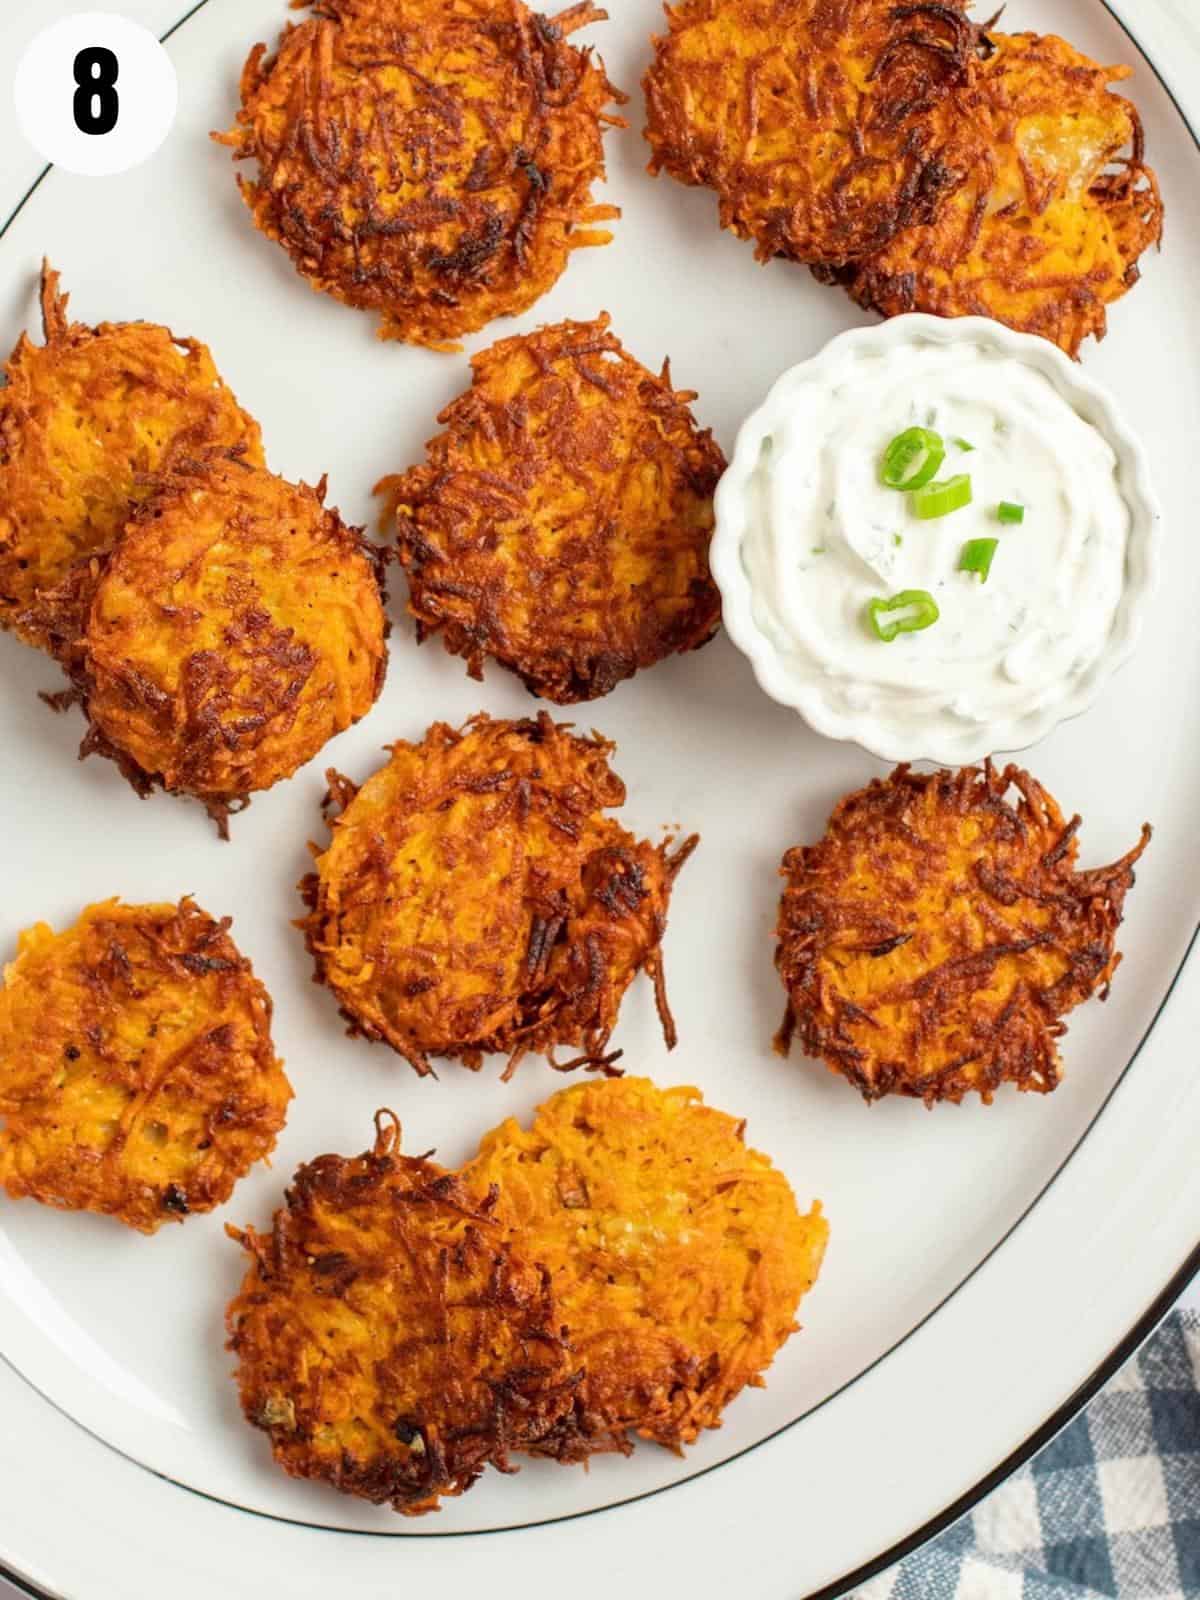 Crispy sweet potato latkes on a white plate with a dip of sour cream and chives.